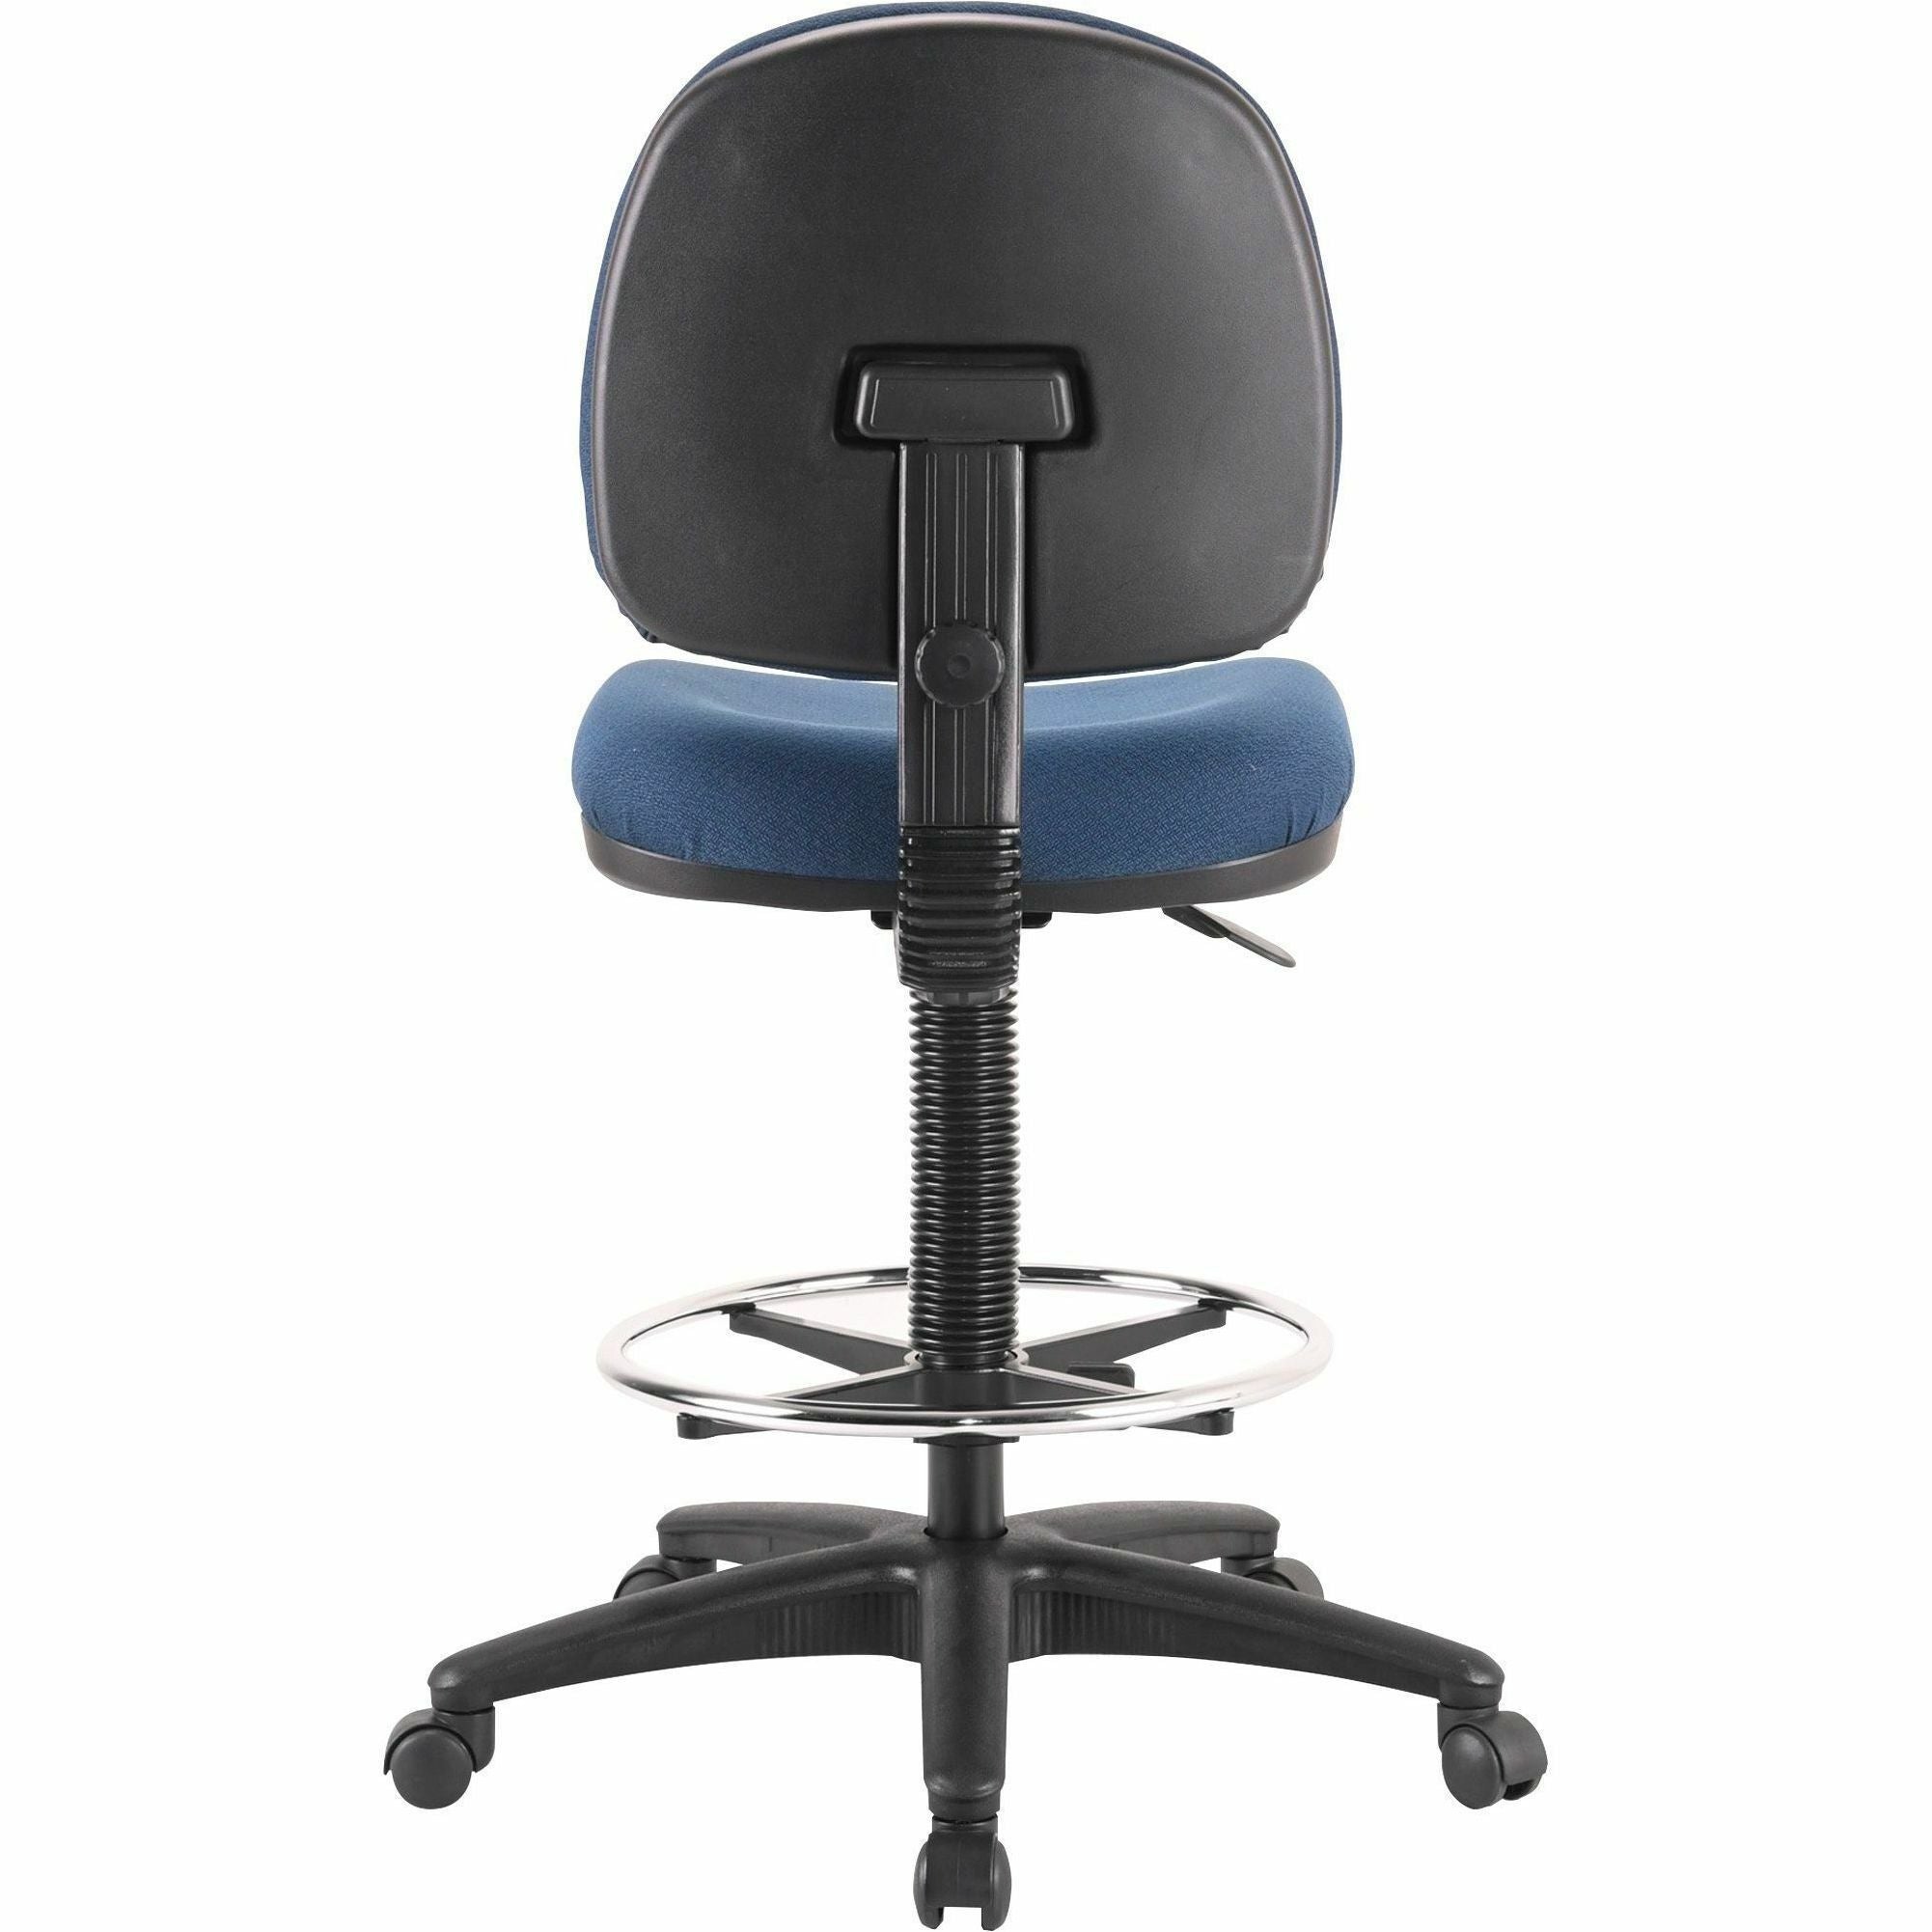 Lorell Millenia Series Adjustable Task Stool with Back - Blue Seat - Blue - 1 Each - 